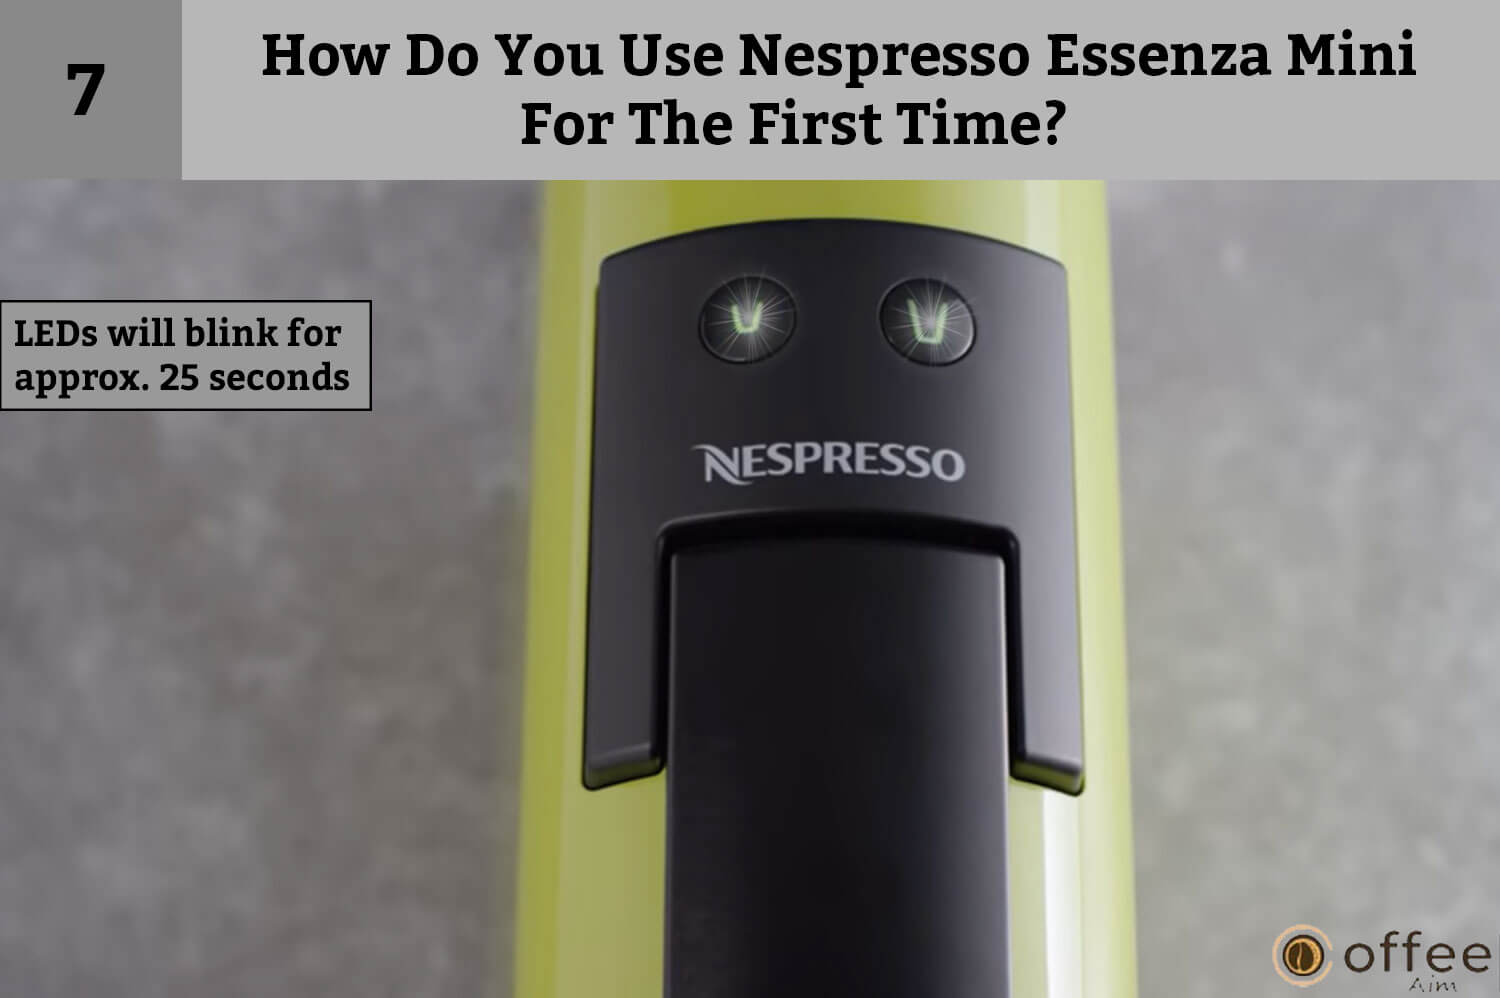 Seventh instruction of How Do You Use Nespresso Essenza Mini For The First Time? is LEDs will blink for approx 25 seconds.